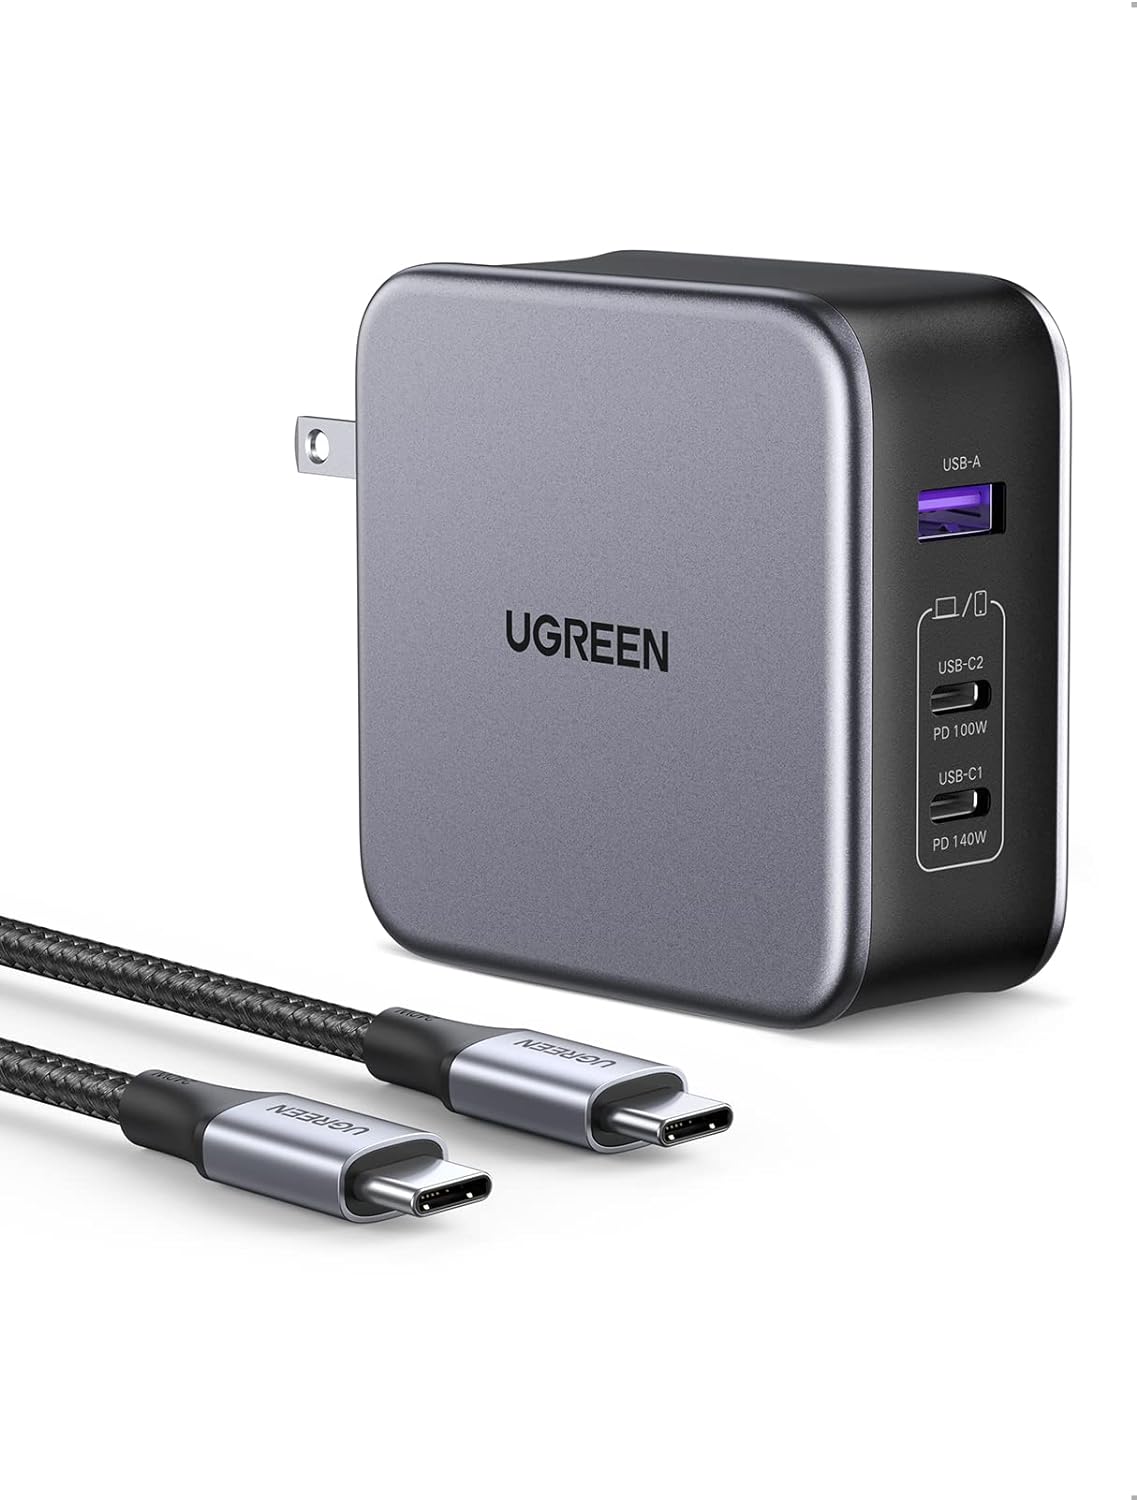 Limited-Time Discount: UGREEN 140W USB C Charger, Mac Book Pro Charger - Save 38%!